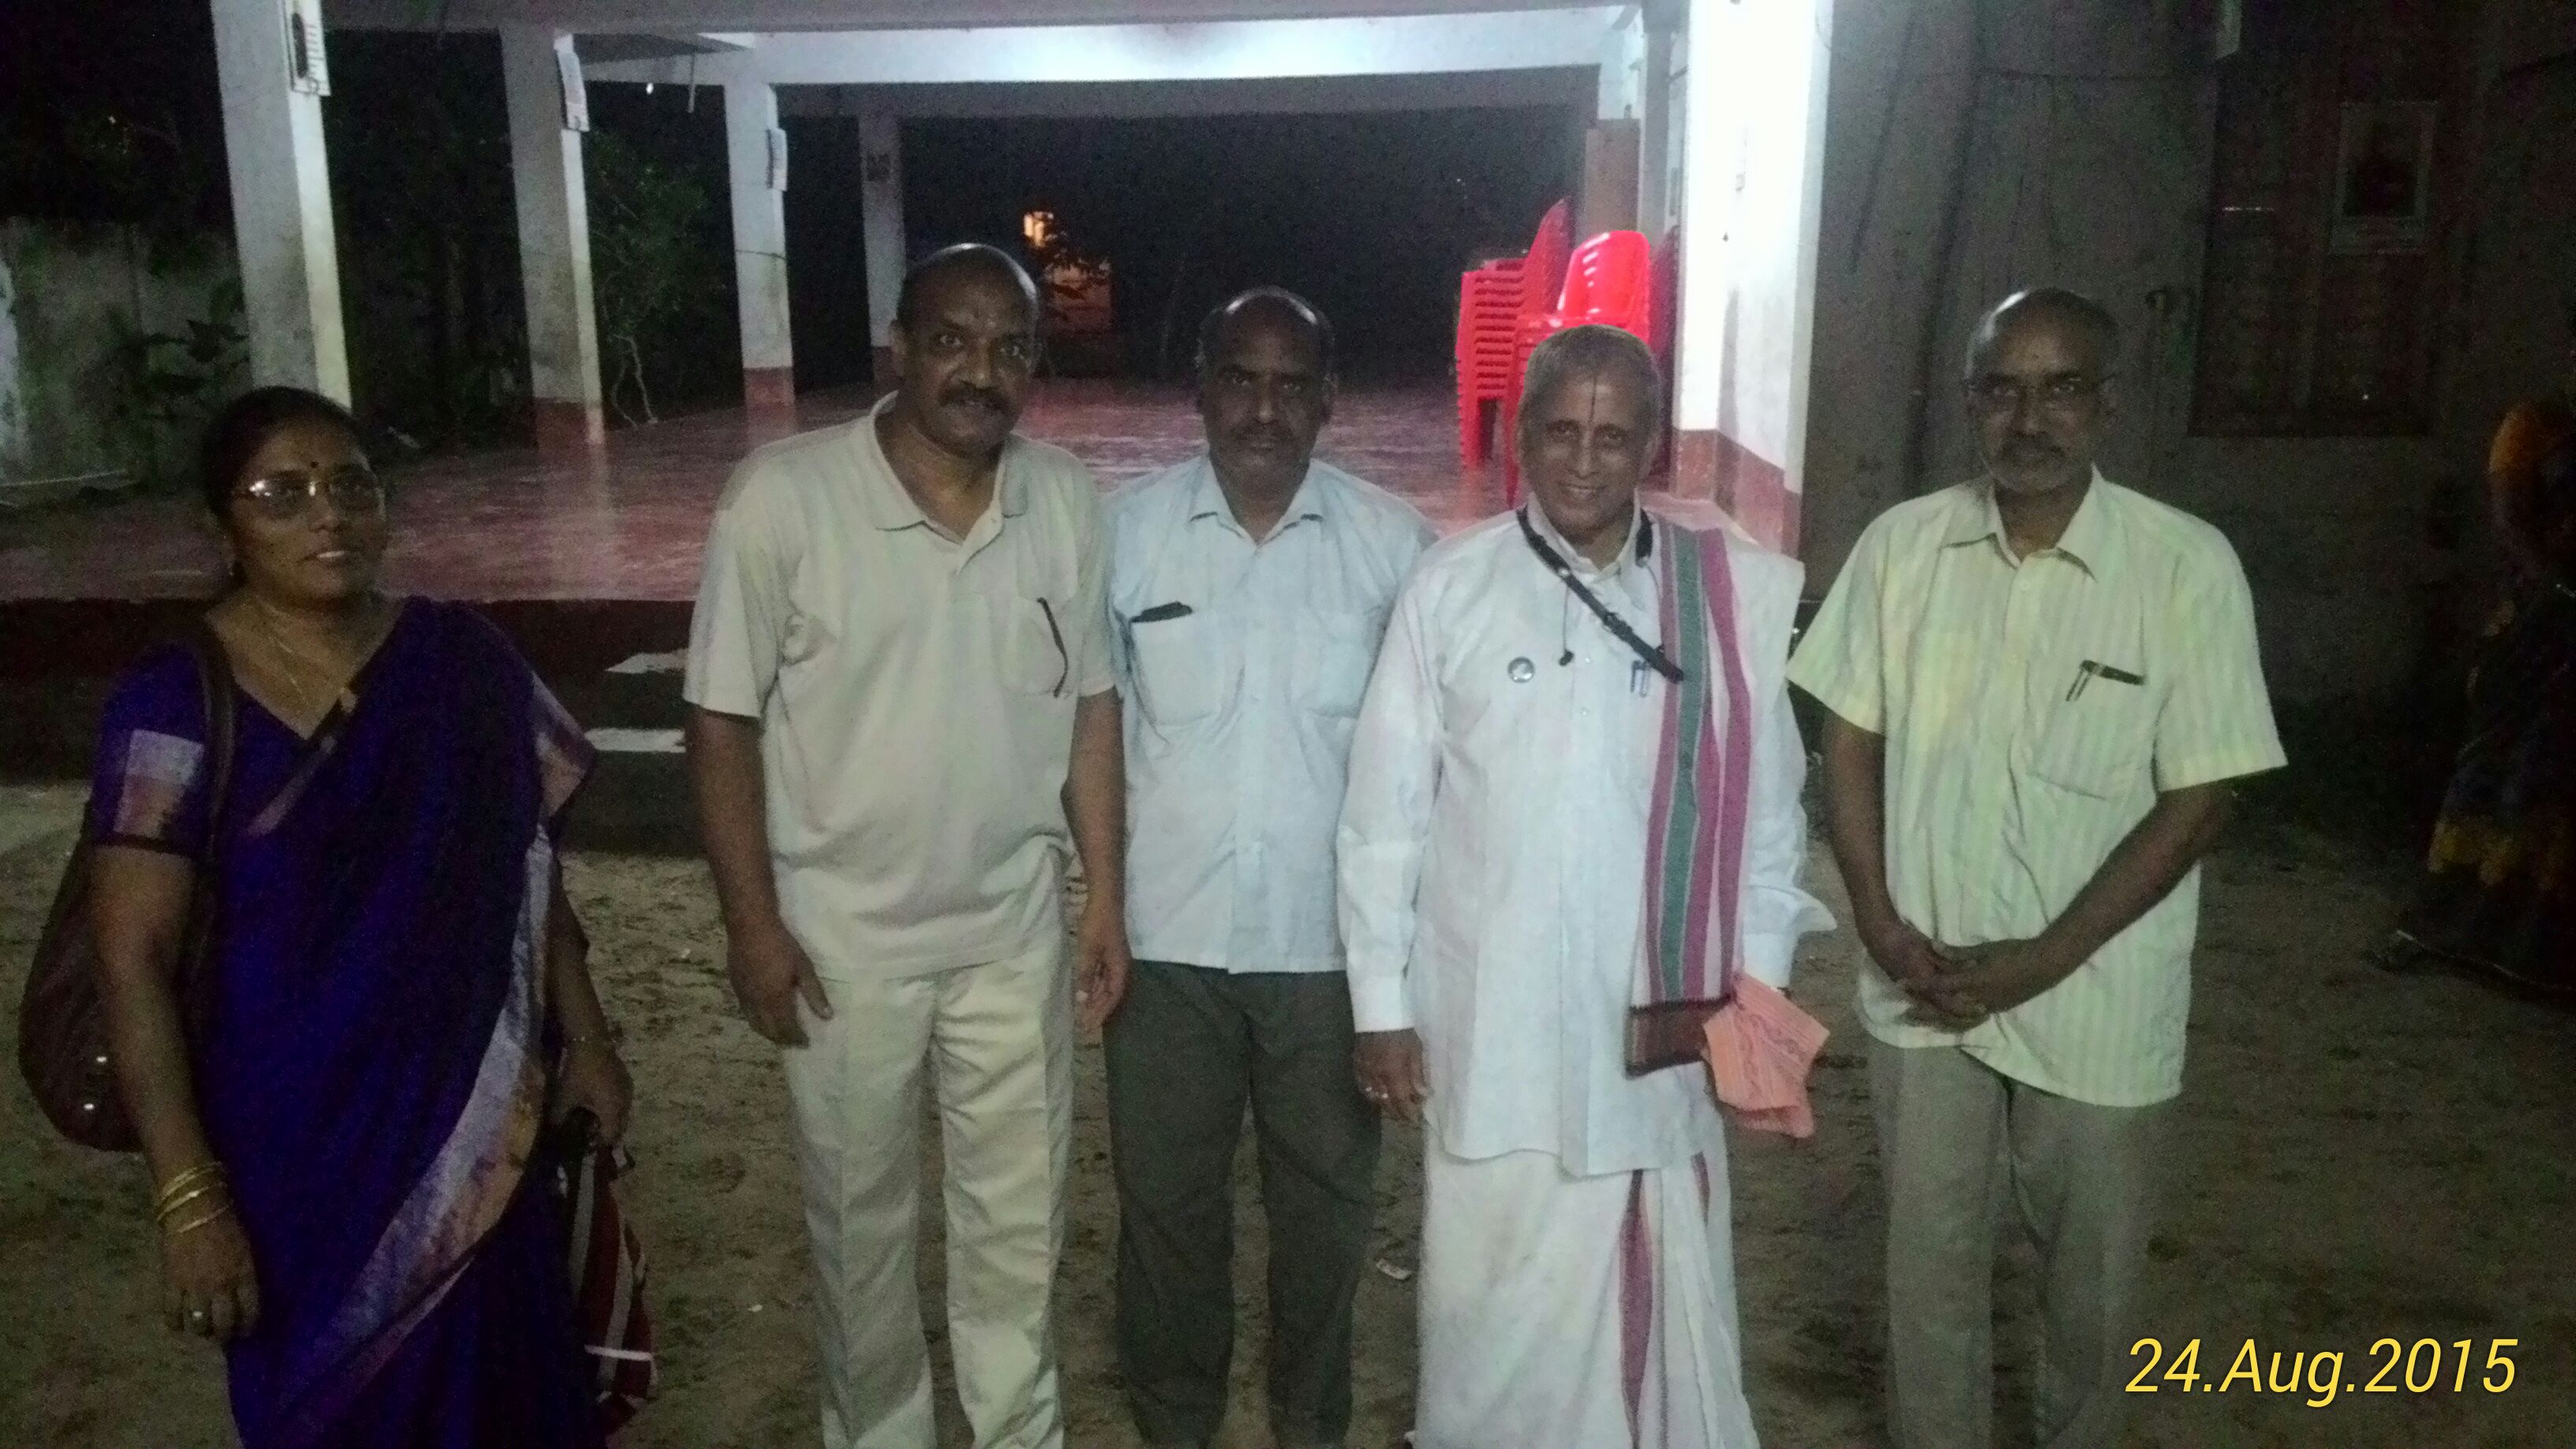 Dr Ekkirala Ananthakrishna garu with the members of the samithi at the end of the camp